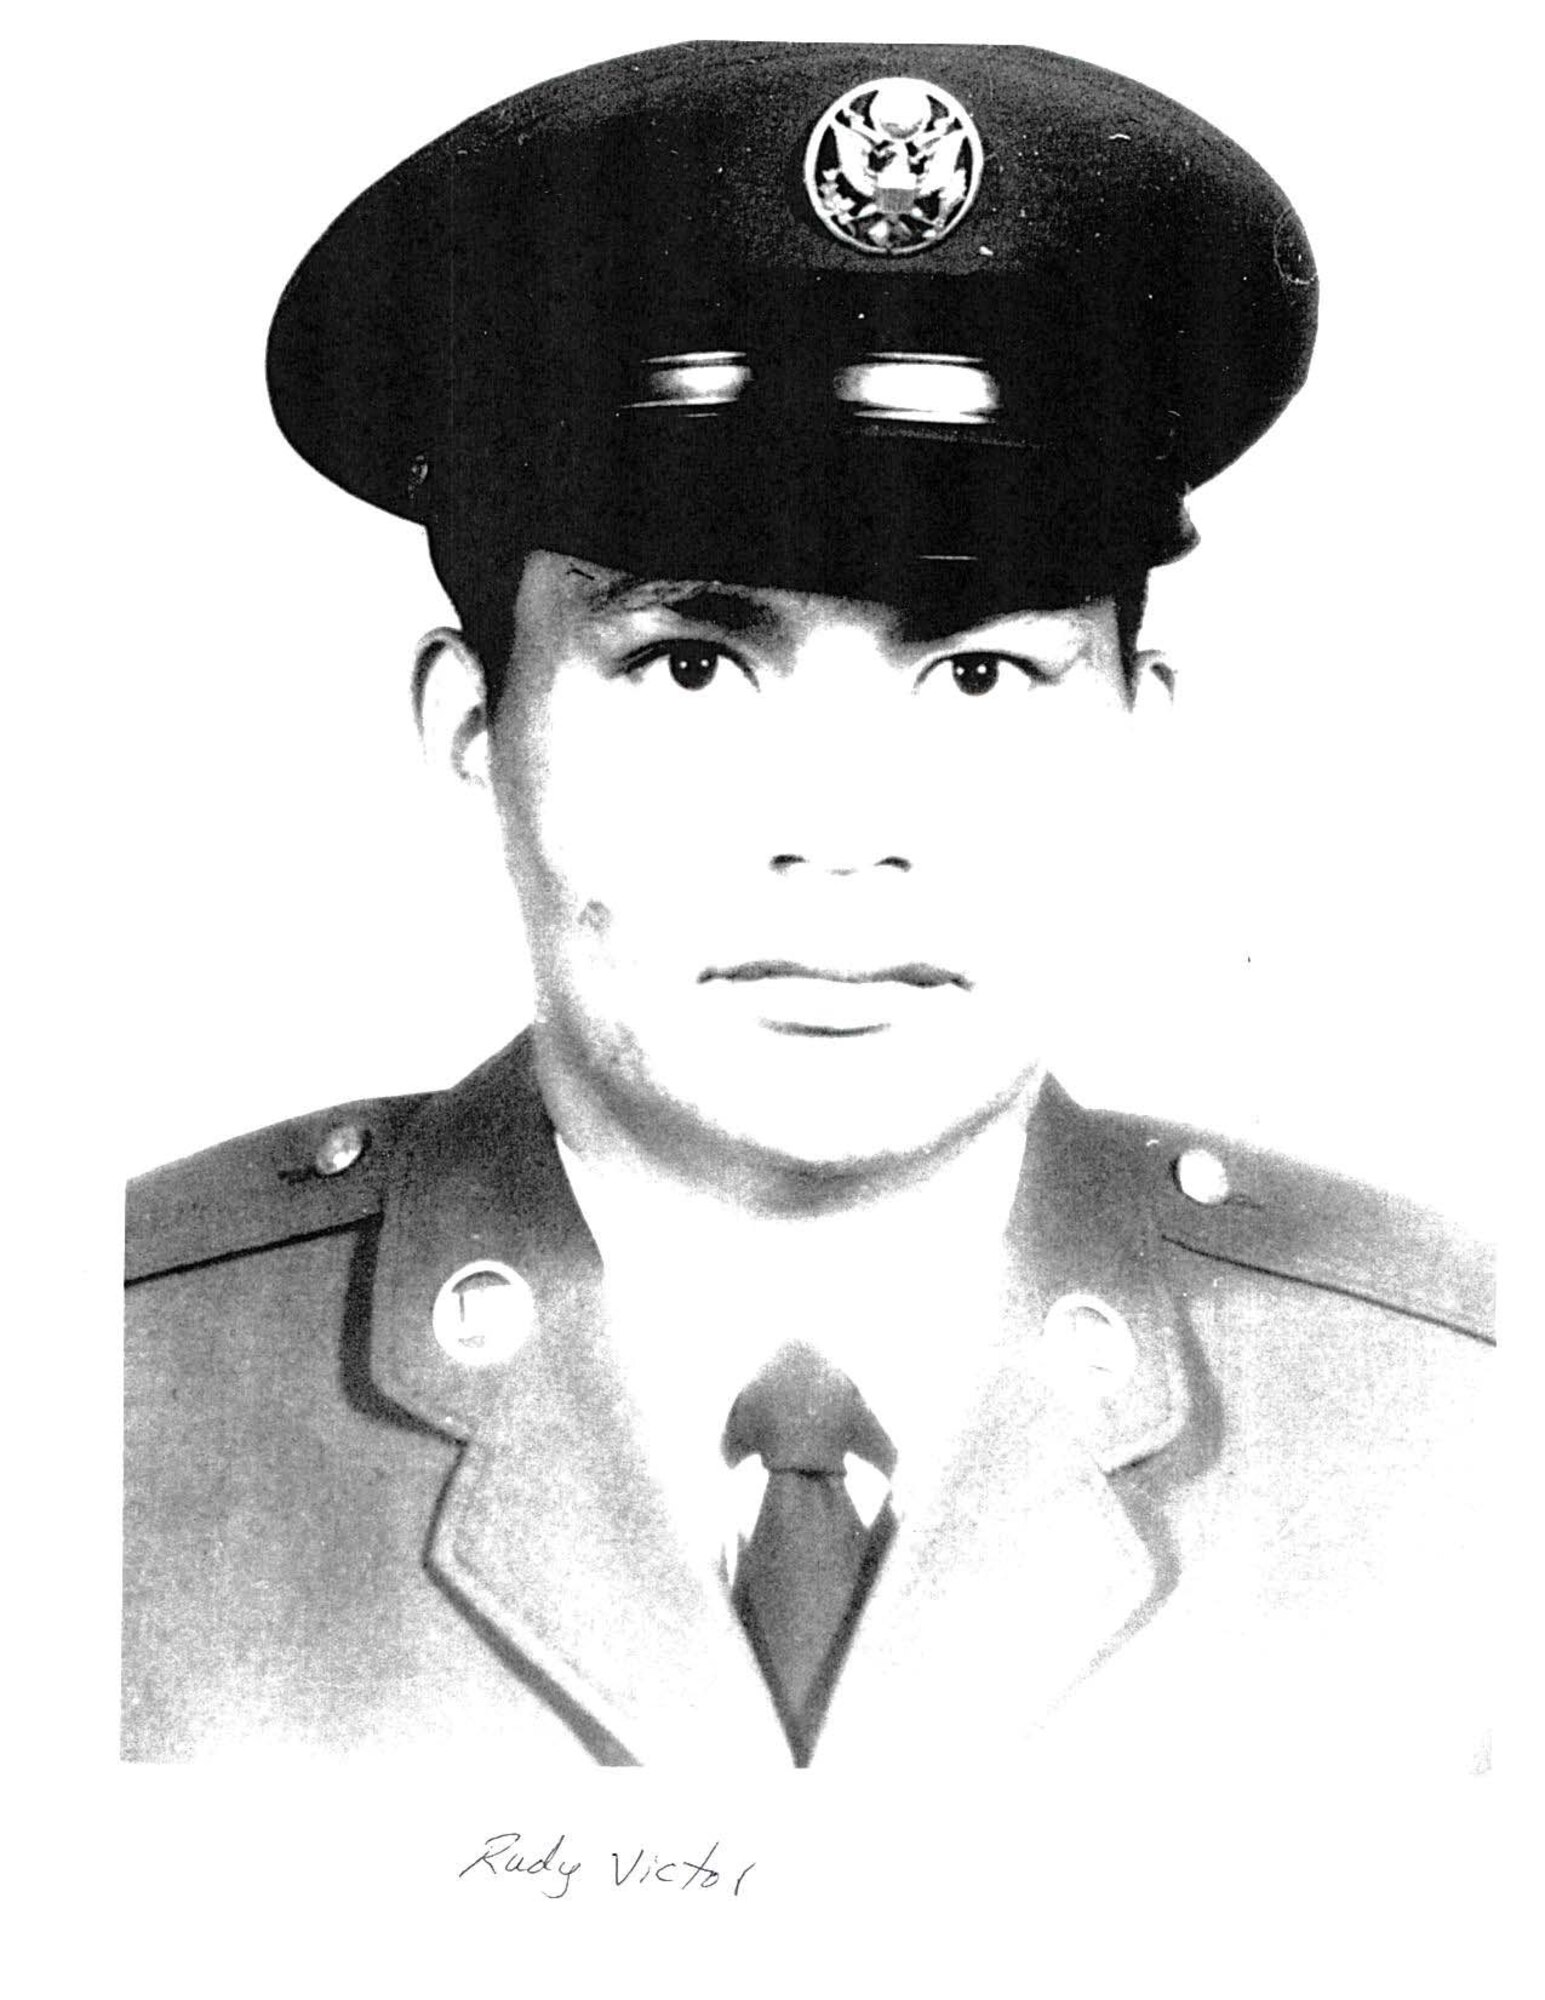 On June 8, 2017, investigators received a dental match on the unknown skull found in Montana in 1982, Airman First Class Rudy Victor Redd had been found. On June 14, 2017, the coroner produced a death certificate concluding Victor's cause and manner of death were undetermined, but ruled Victor died on or about June 15, 1974. (U.S. Air Force photo)